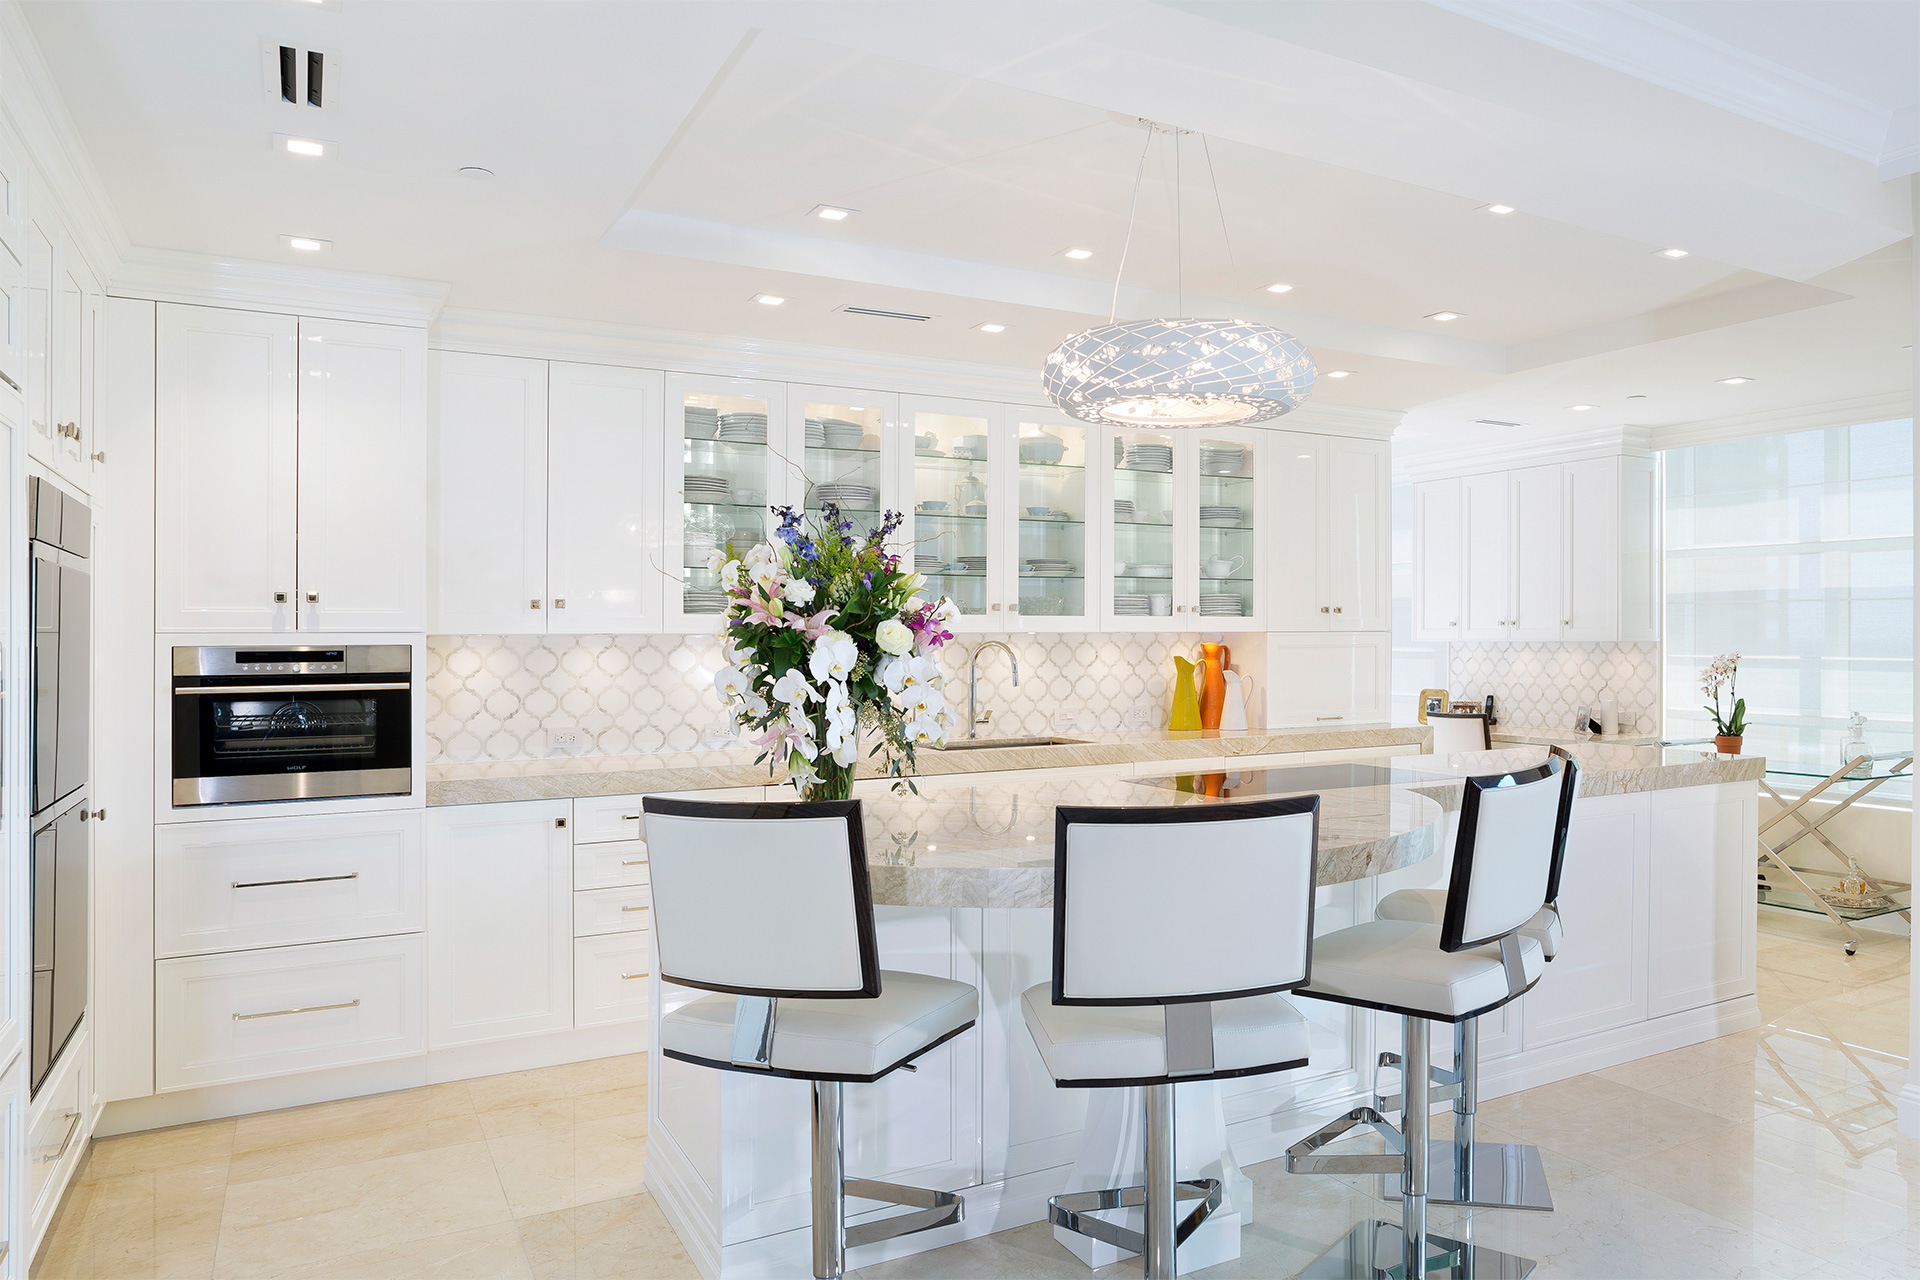 Custom Kitchens and Bathrooms of South Florida - The Place For Kitchens ...